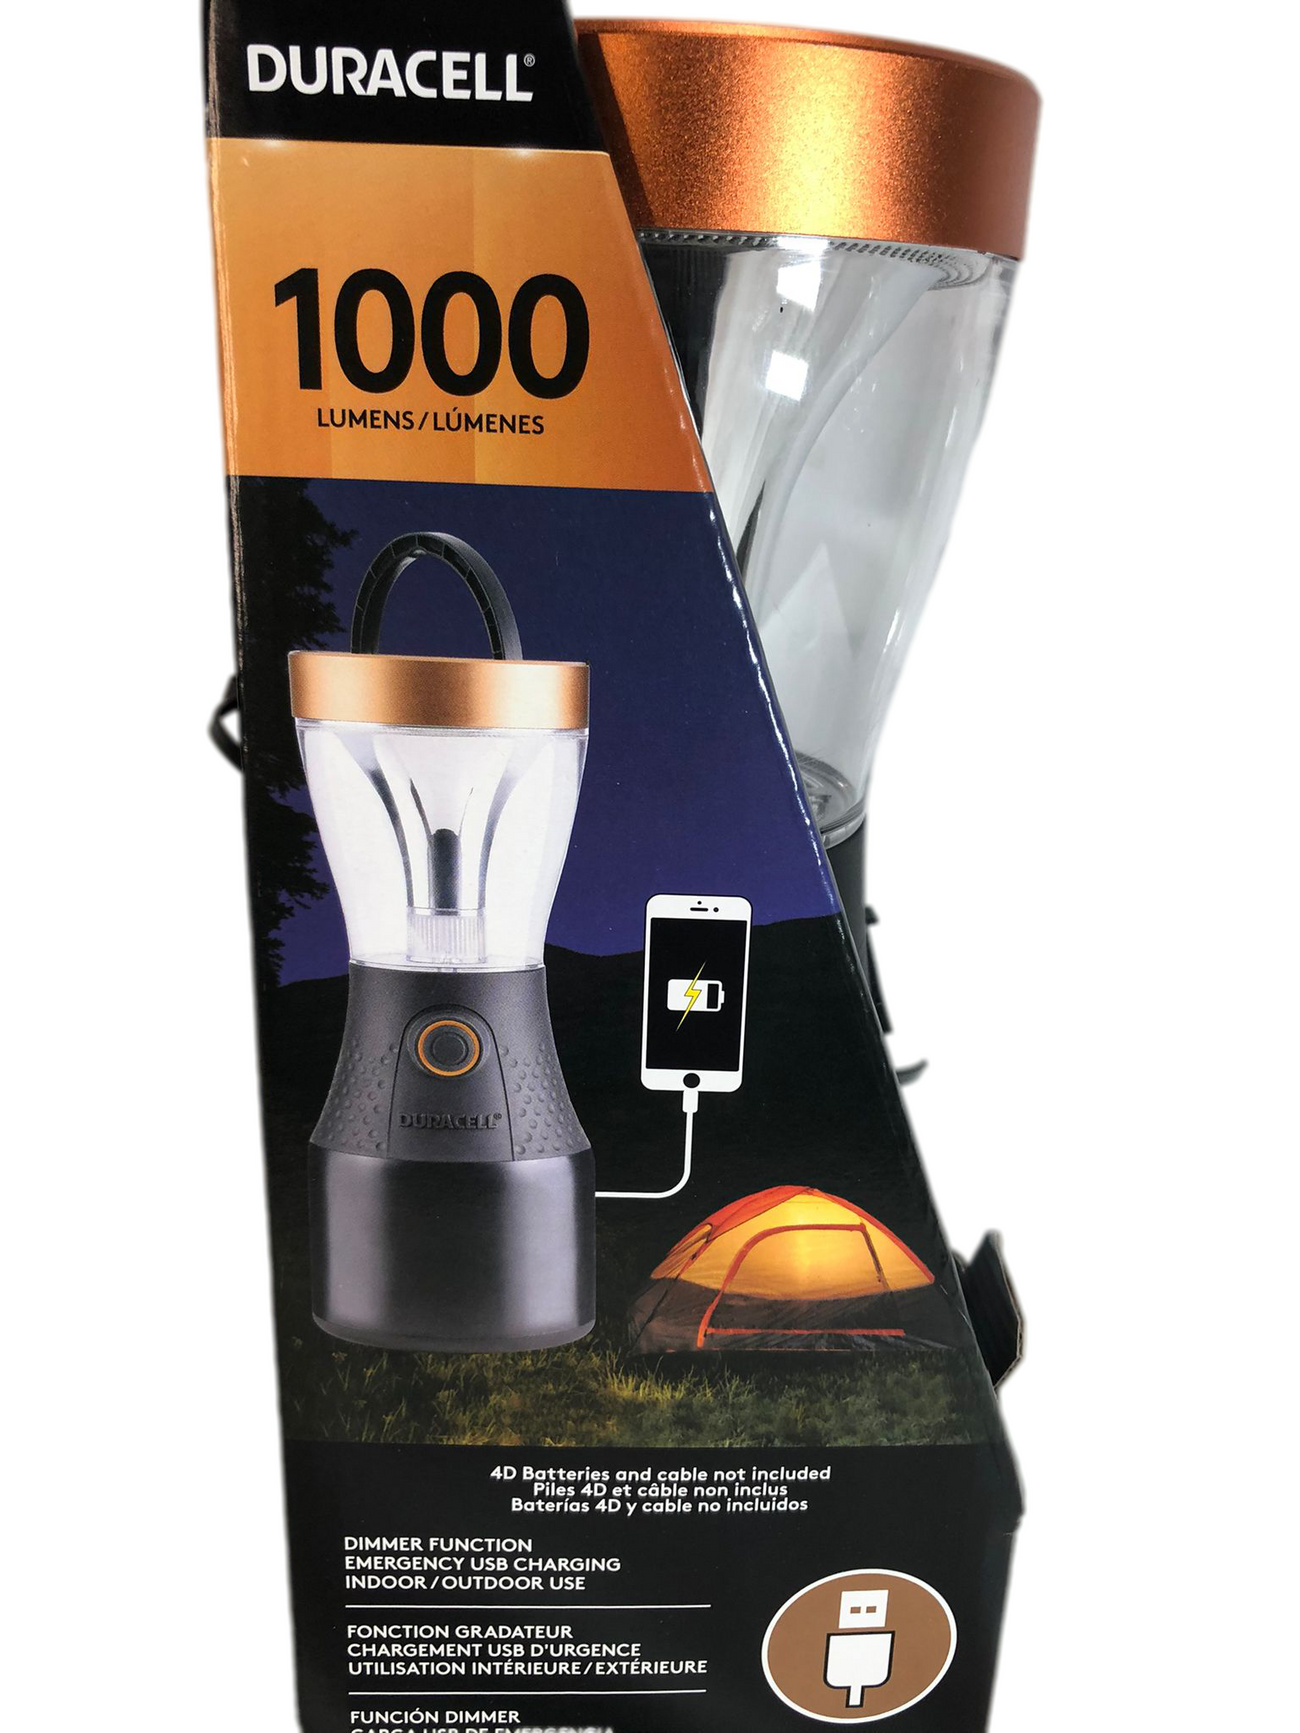 NEW Duracell LED Lantern (2 pack). 5e - Lil Dusty Online Auctions - All  Estate Services, LLC